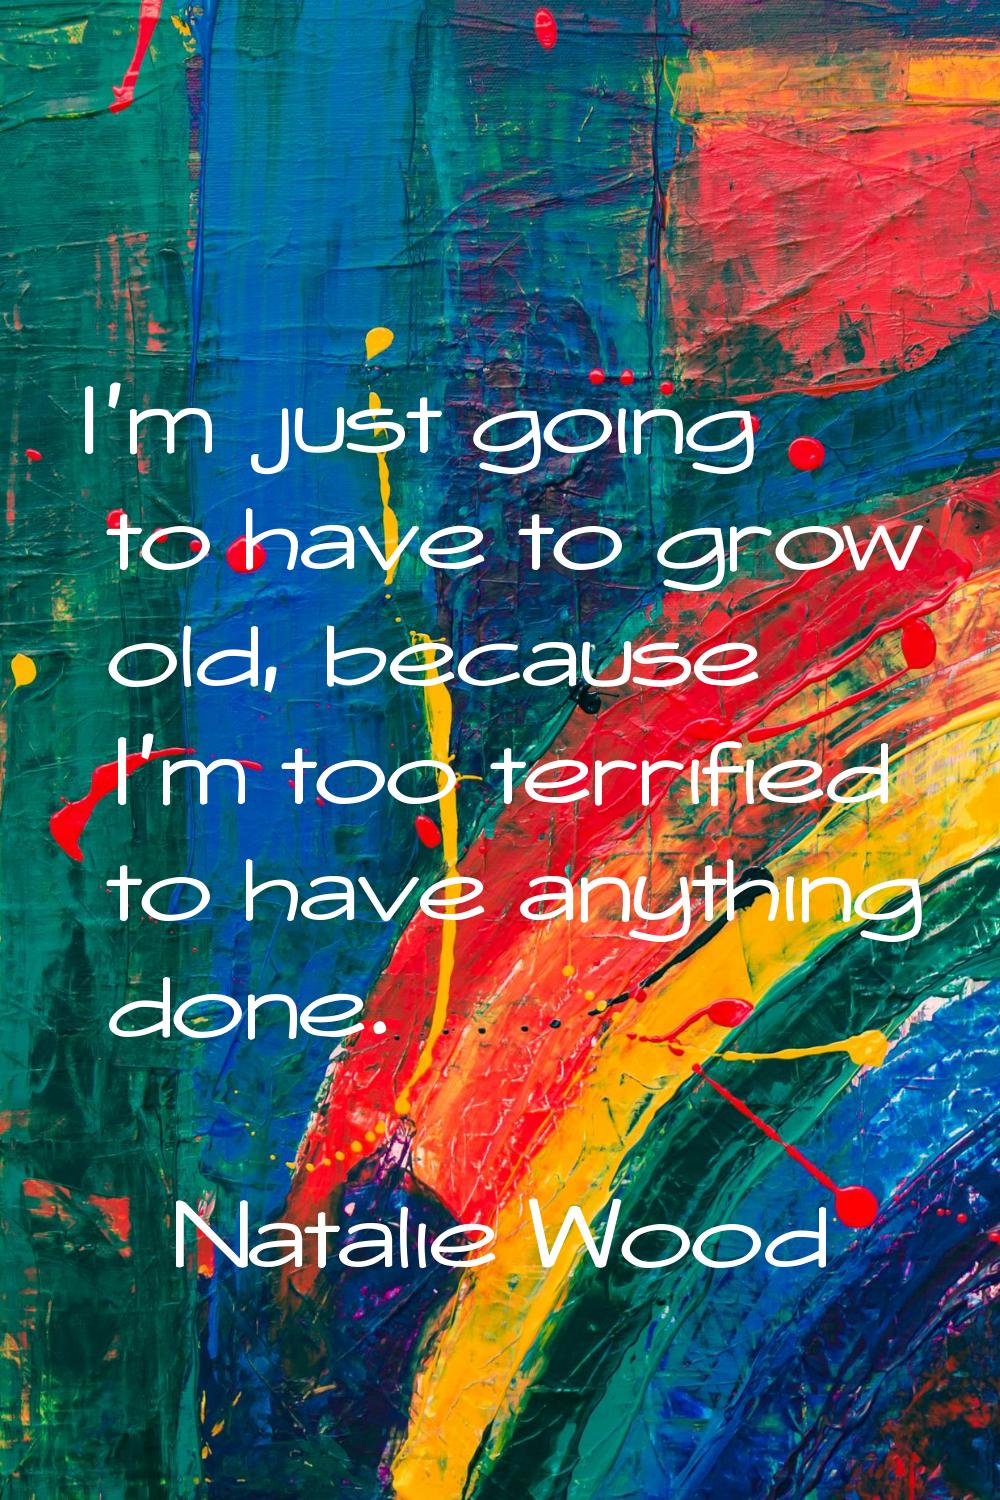 I'm just going to have to grow old, because I'm too terrified to have anything done.